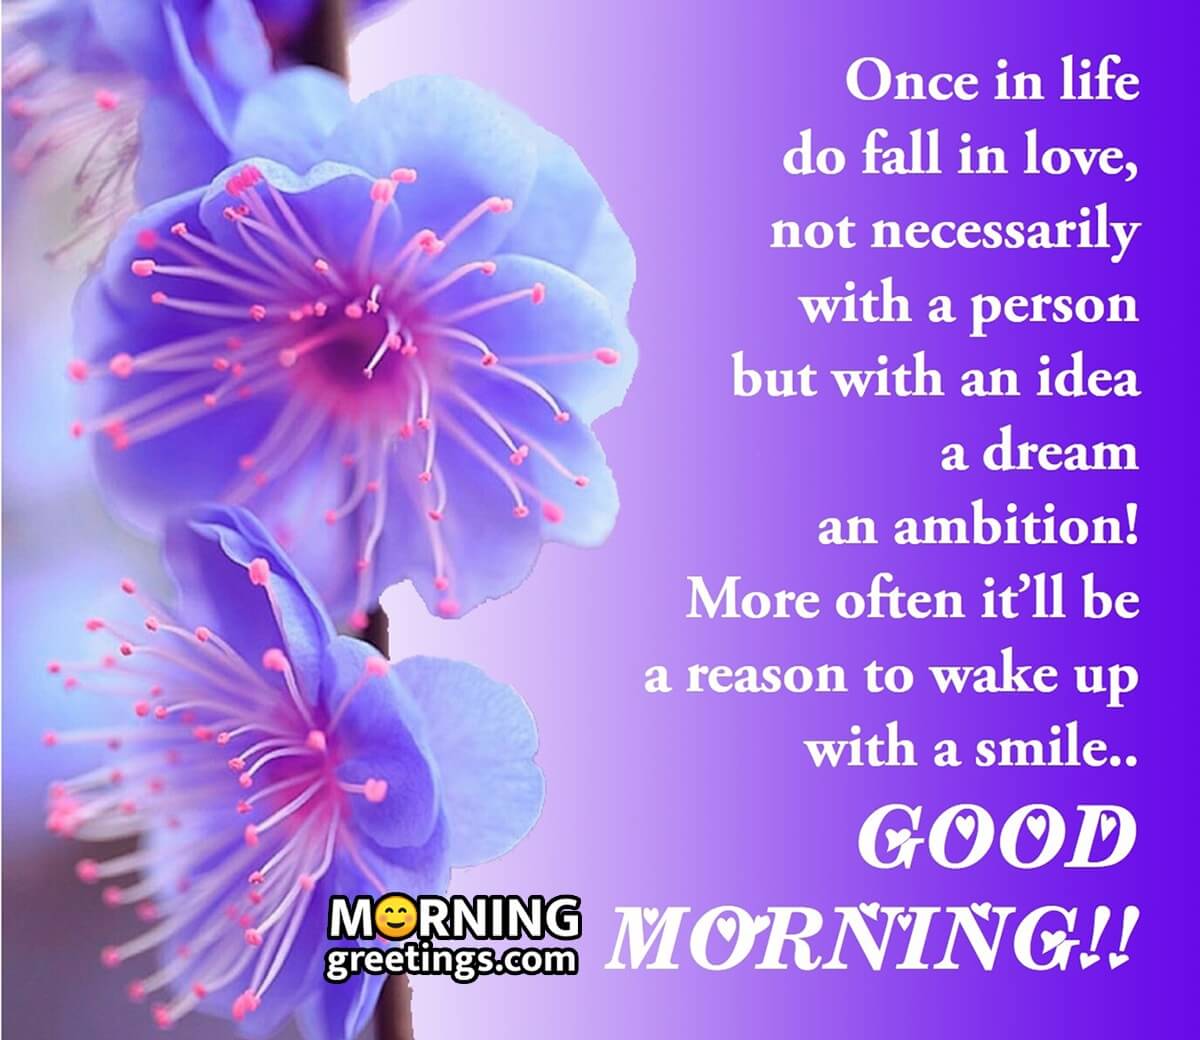 25 Positive Good Morning Life Messages - Morning Greetings ...